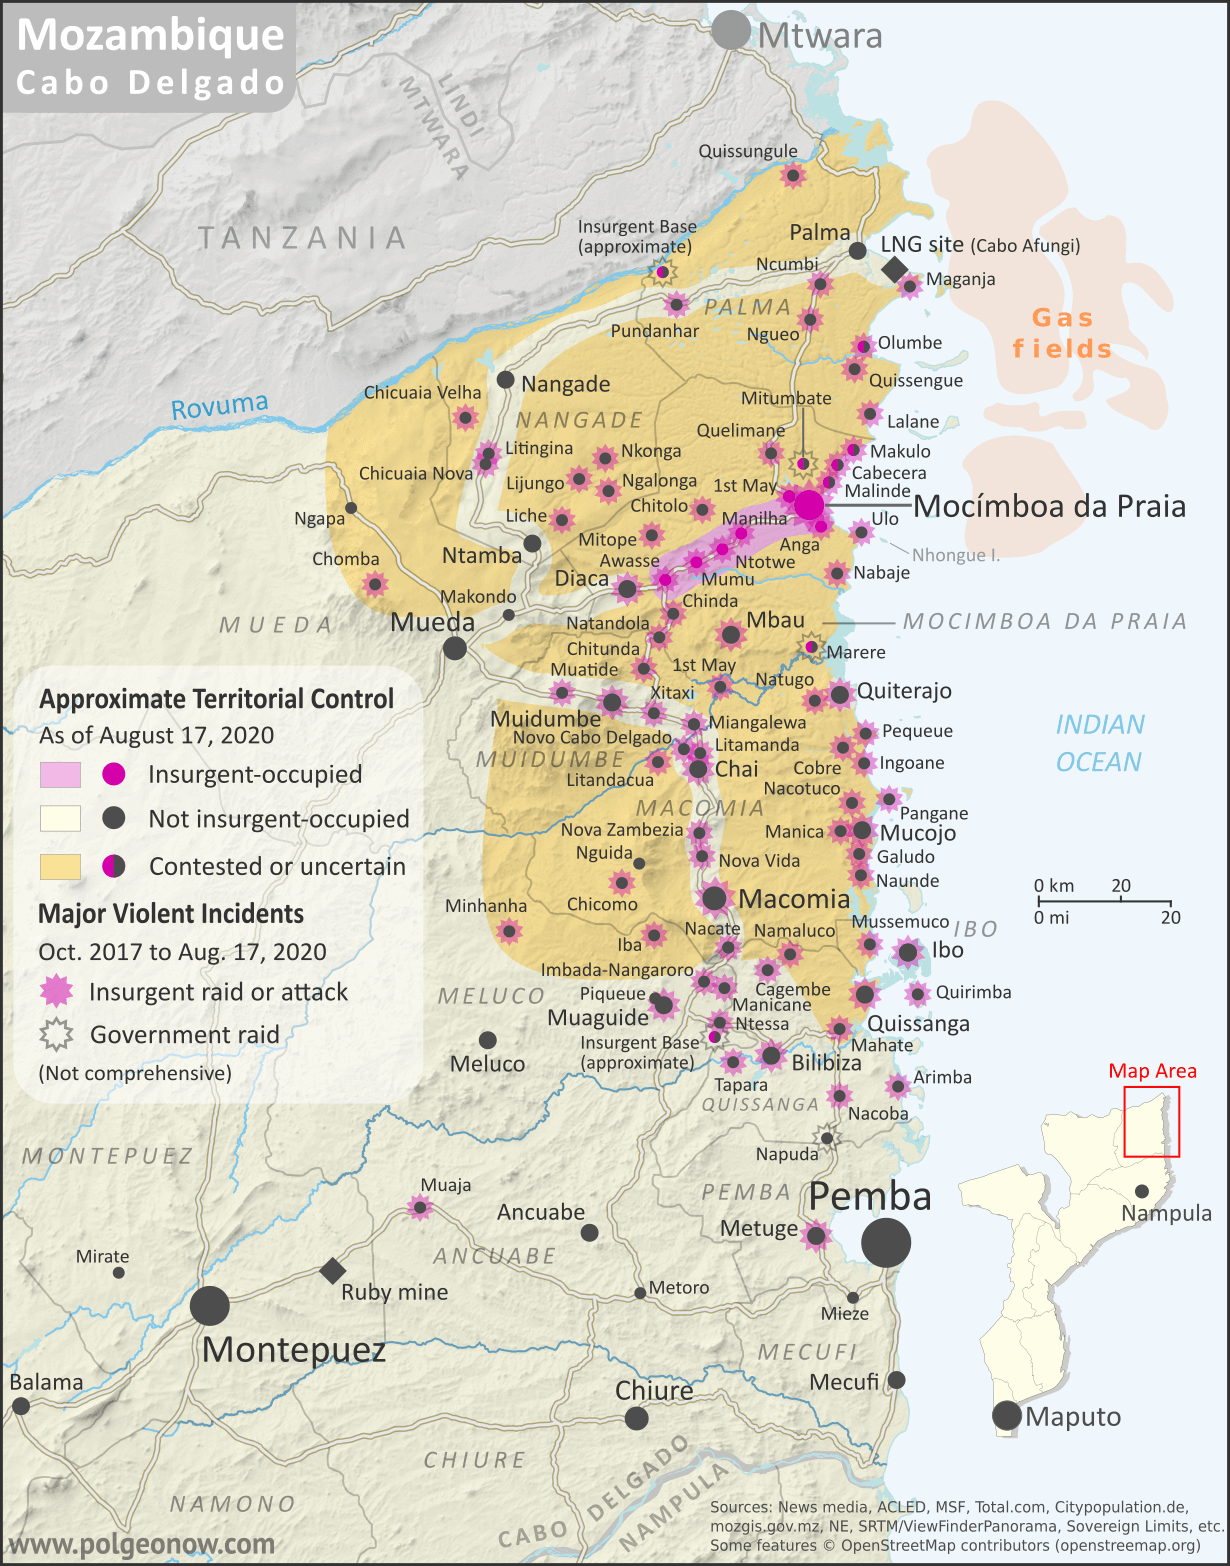 Mozambique: Cabo Delgado insurgency map - October 2017 to August 2020: Detailed, close-up control map showing areas occupied by so-called ISIS-linked rebels in northern Mozambique (also known as Ahlu Sunnah Wa Jama, ASWJ, or Ansar al-Sunnah), plus towns and villages raided by the insurgents over the past three years. Shows roads, rivers, and terrain, and includes key locations of the insurgency such as Mocímboa da Praia, Awasse, Macomia, the Total LNG site and natural gas fields, Miangalewa, Litingina, Ntessa, Cagembe, Marere, Makulo, and many, many more. Colorblind accessible.